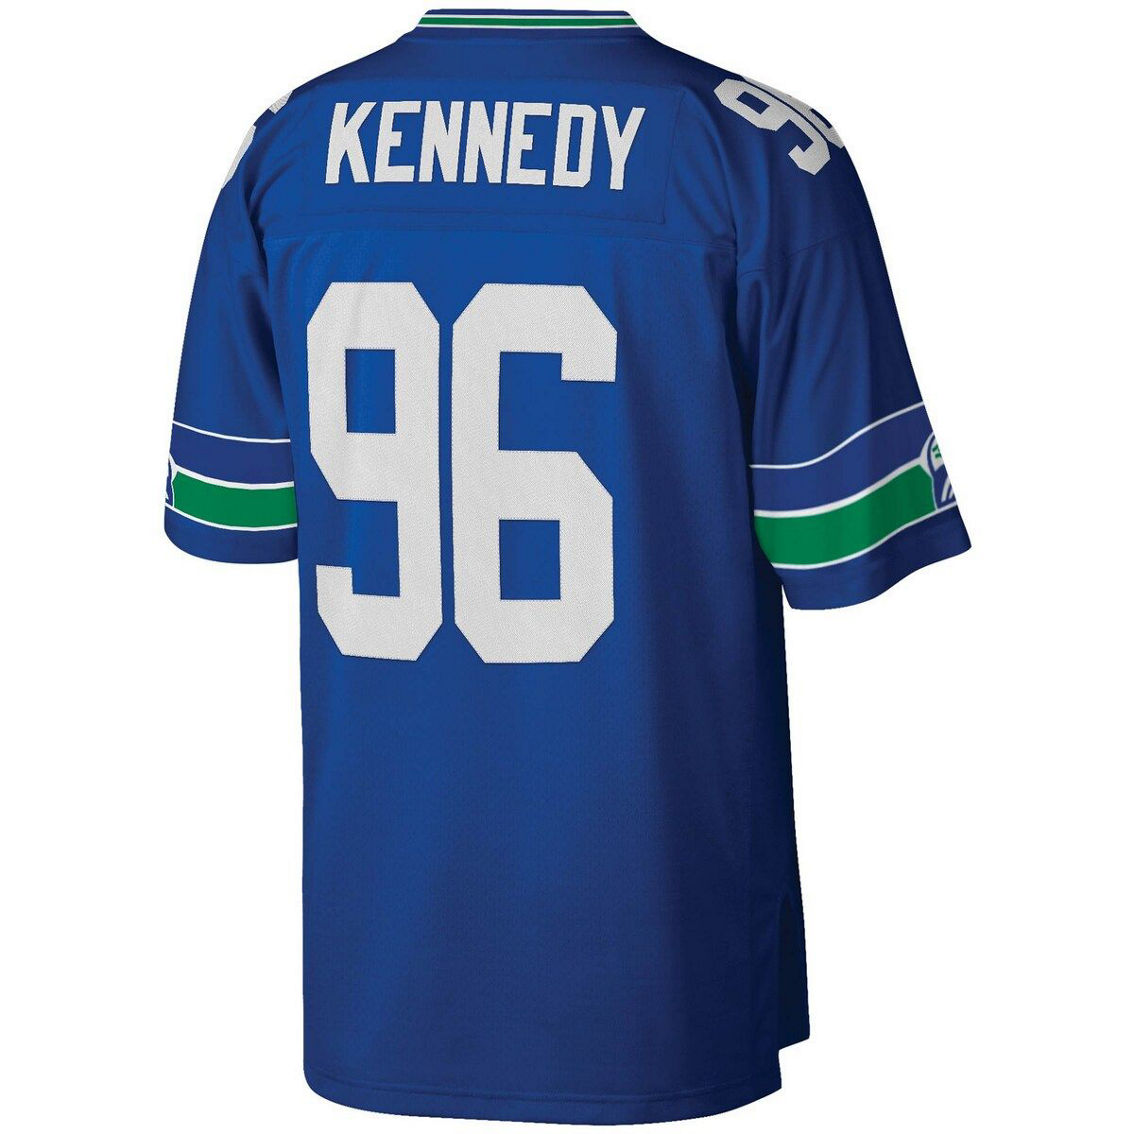 Mitchell & Ness Men's Cortez Kennedy Royal Seattle Seahawks 1993 Legacy Replica Jersey - Image 4 of 4